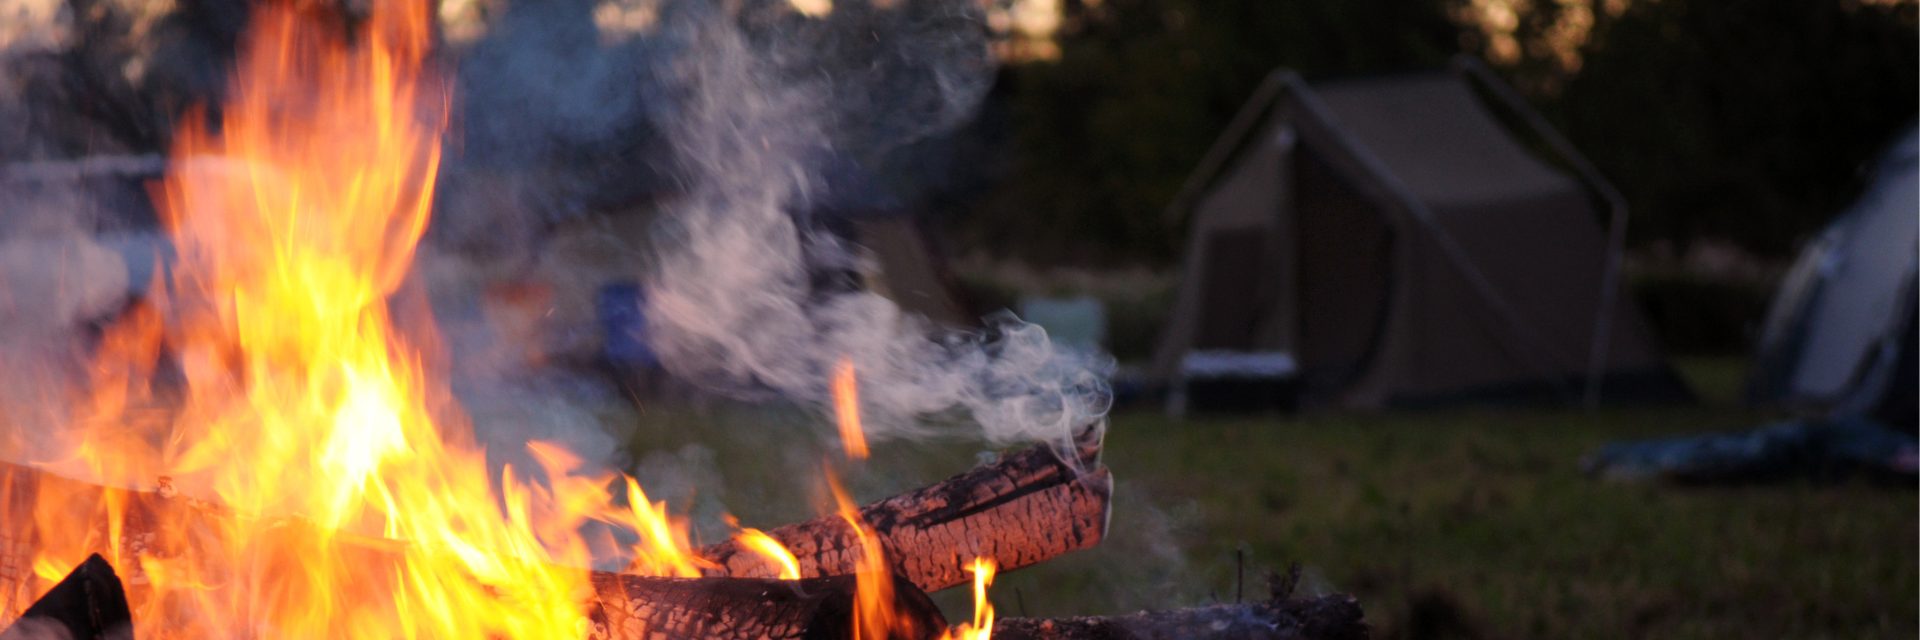 Campfire burning in the foreground with a blurred tent in the background at a campsite during dusk.